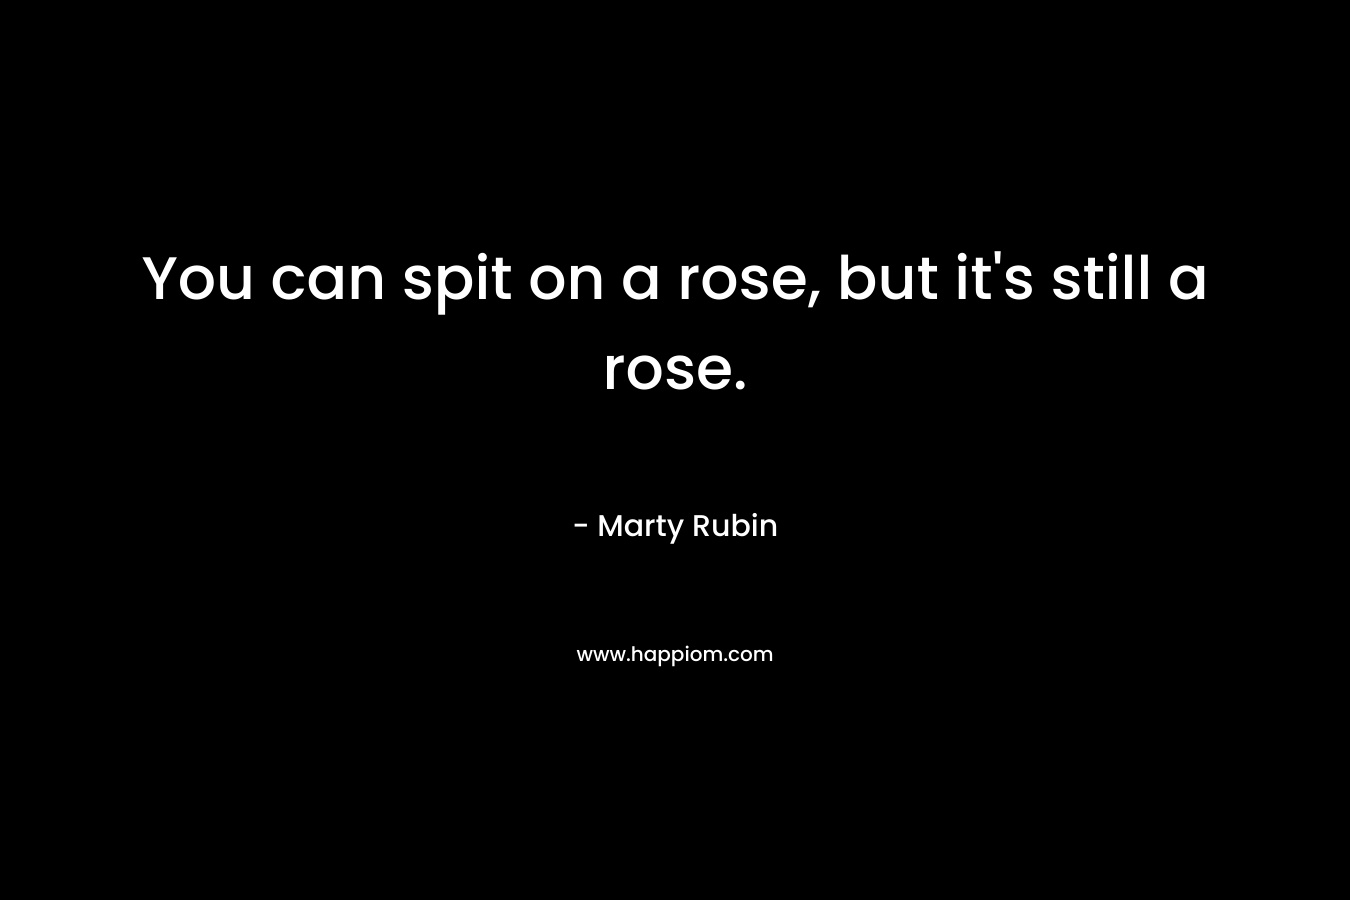 You can spit on a rose, but it's still a rose.